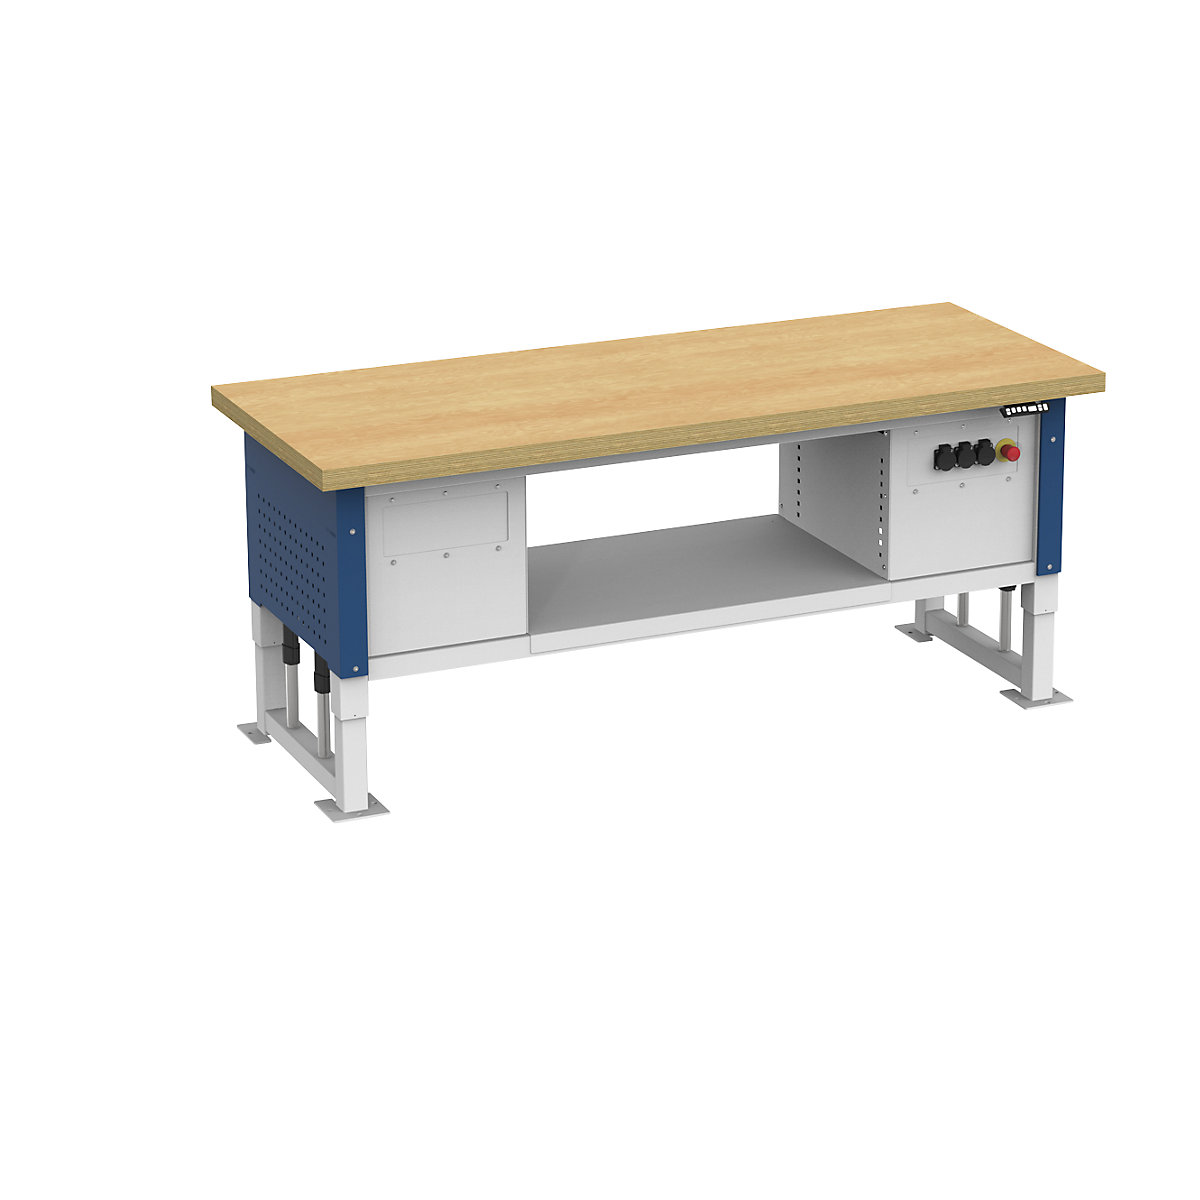 Heavy duty table, electrically height adjustable, worktop width 2030 mm, max. surface load 2000 kg, gentian blue RAL 5010-2